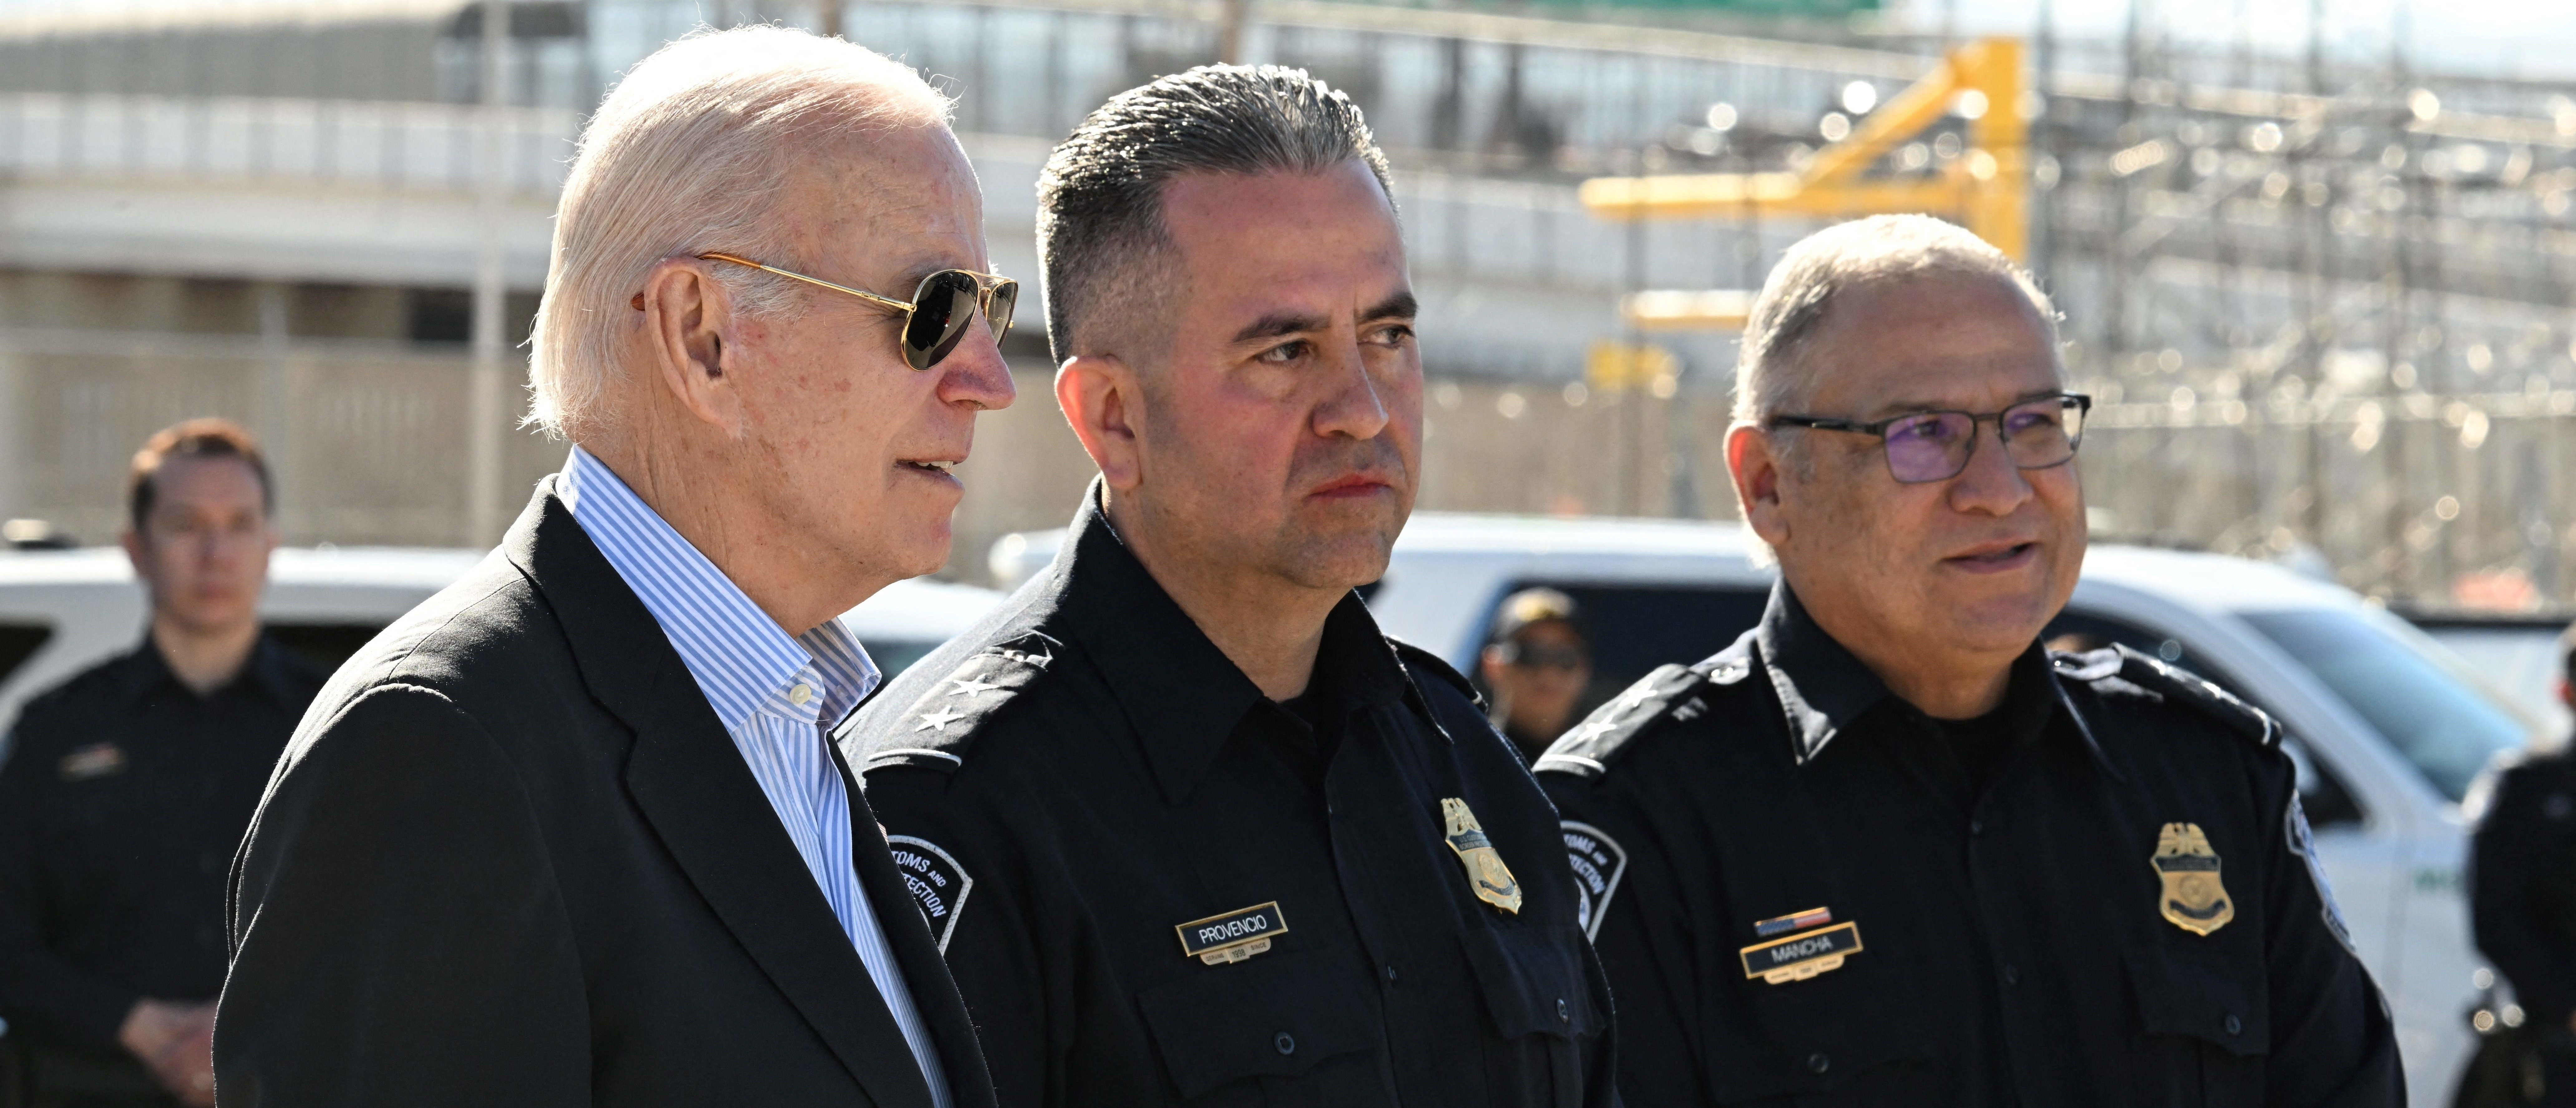 Biden Travels To U.S.-Mexico Border Amid Record-Breaking Illegal Immigrant Encounters